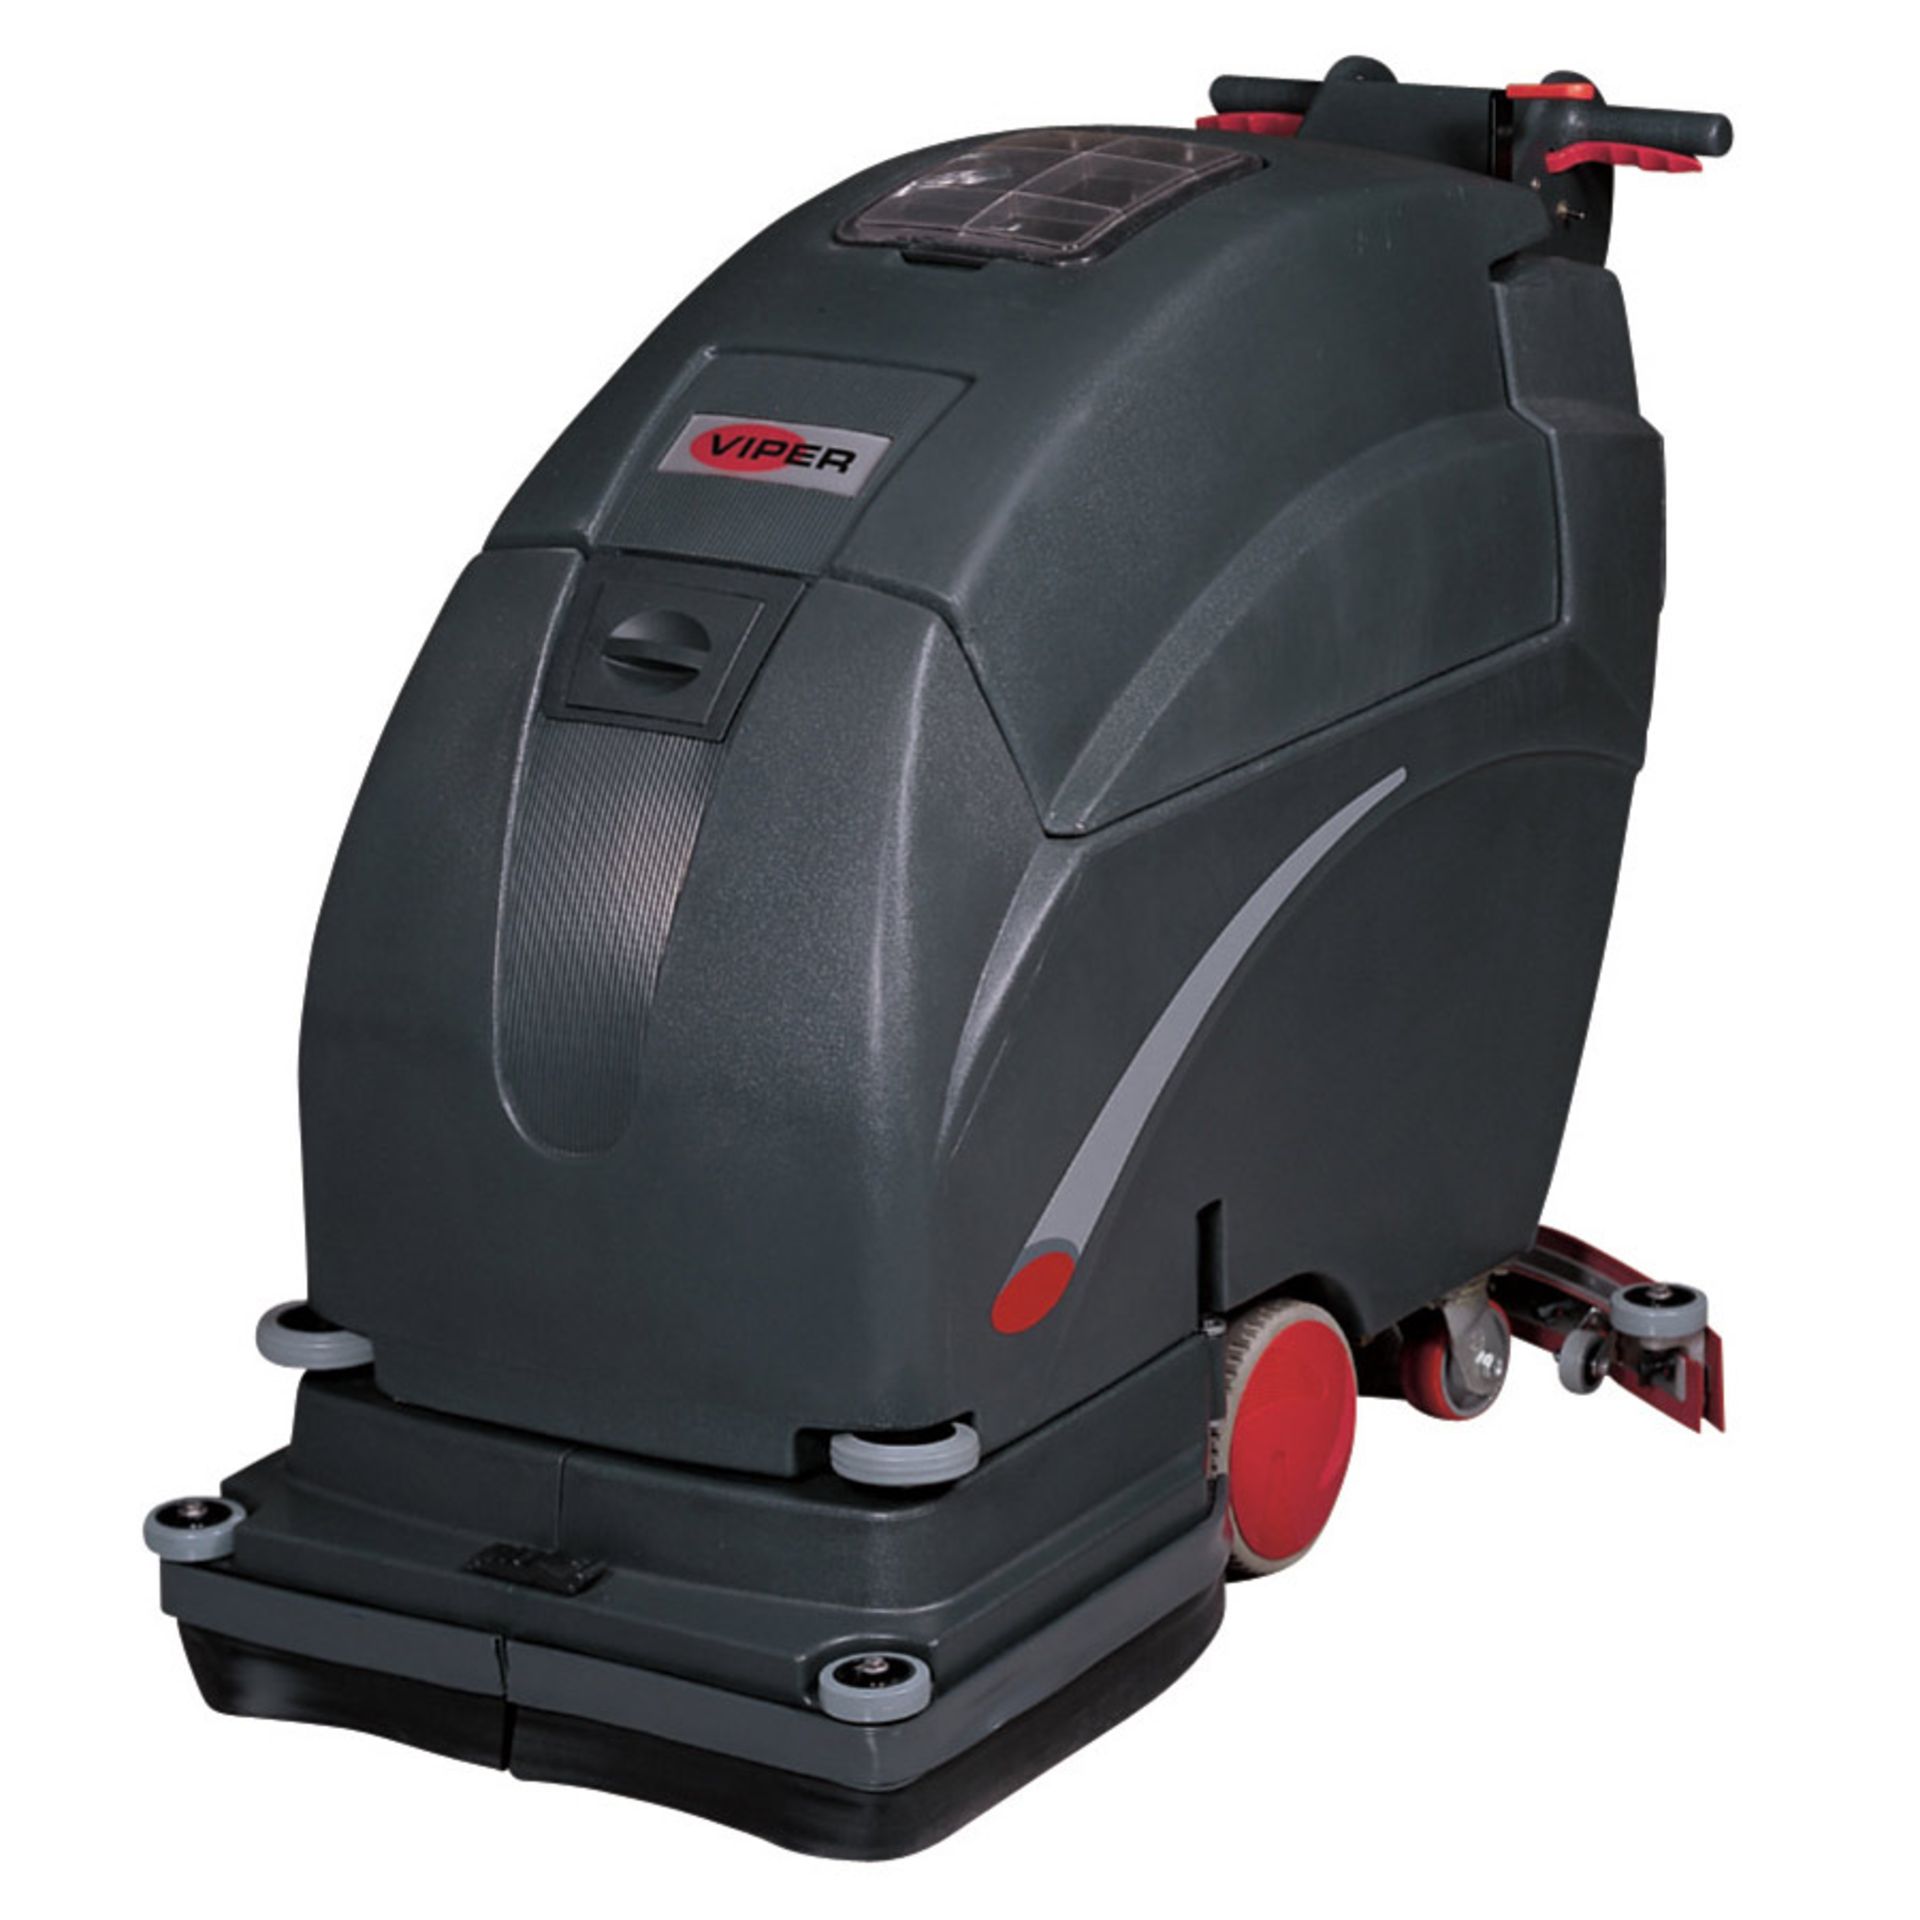 Viper Fang 20HD Walk-behind scrubber dryer. Transaxle drive system.  Light and easy to manoeuvre. - Image 3 of 5